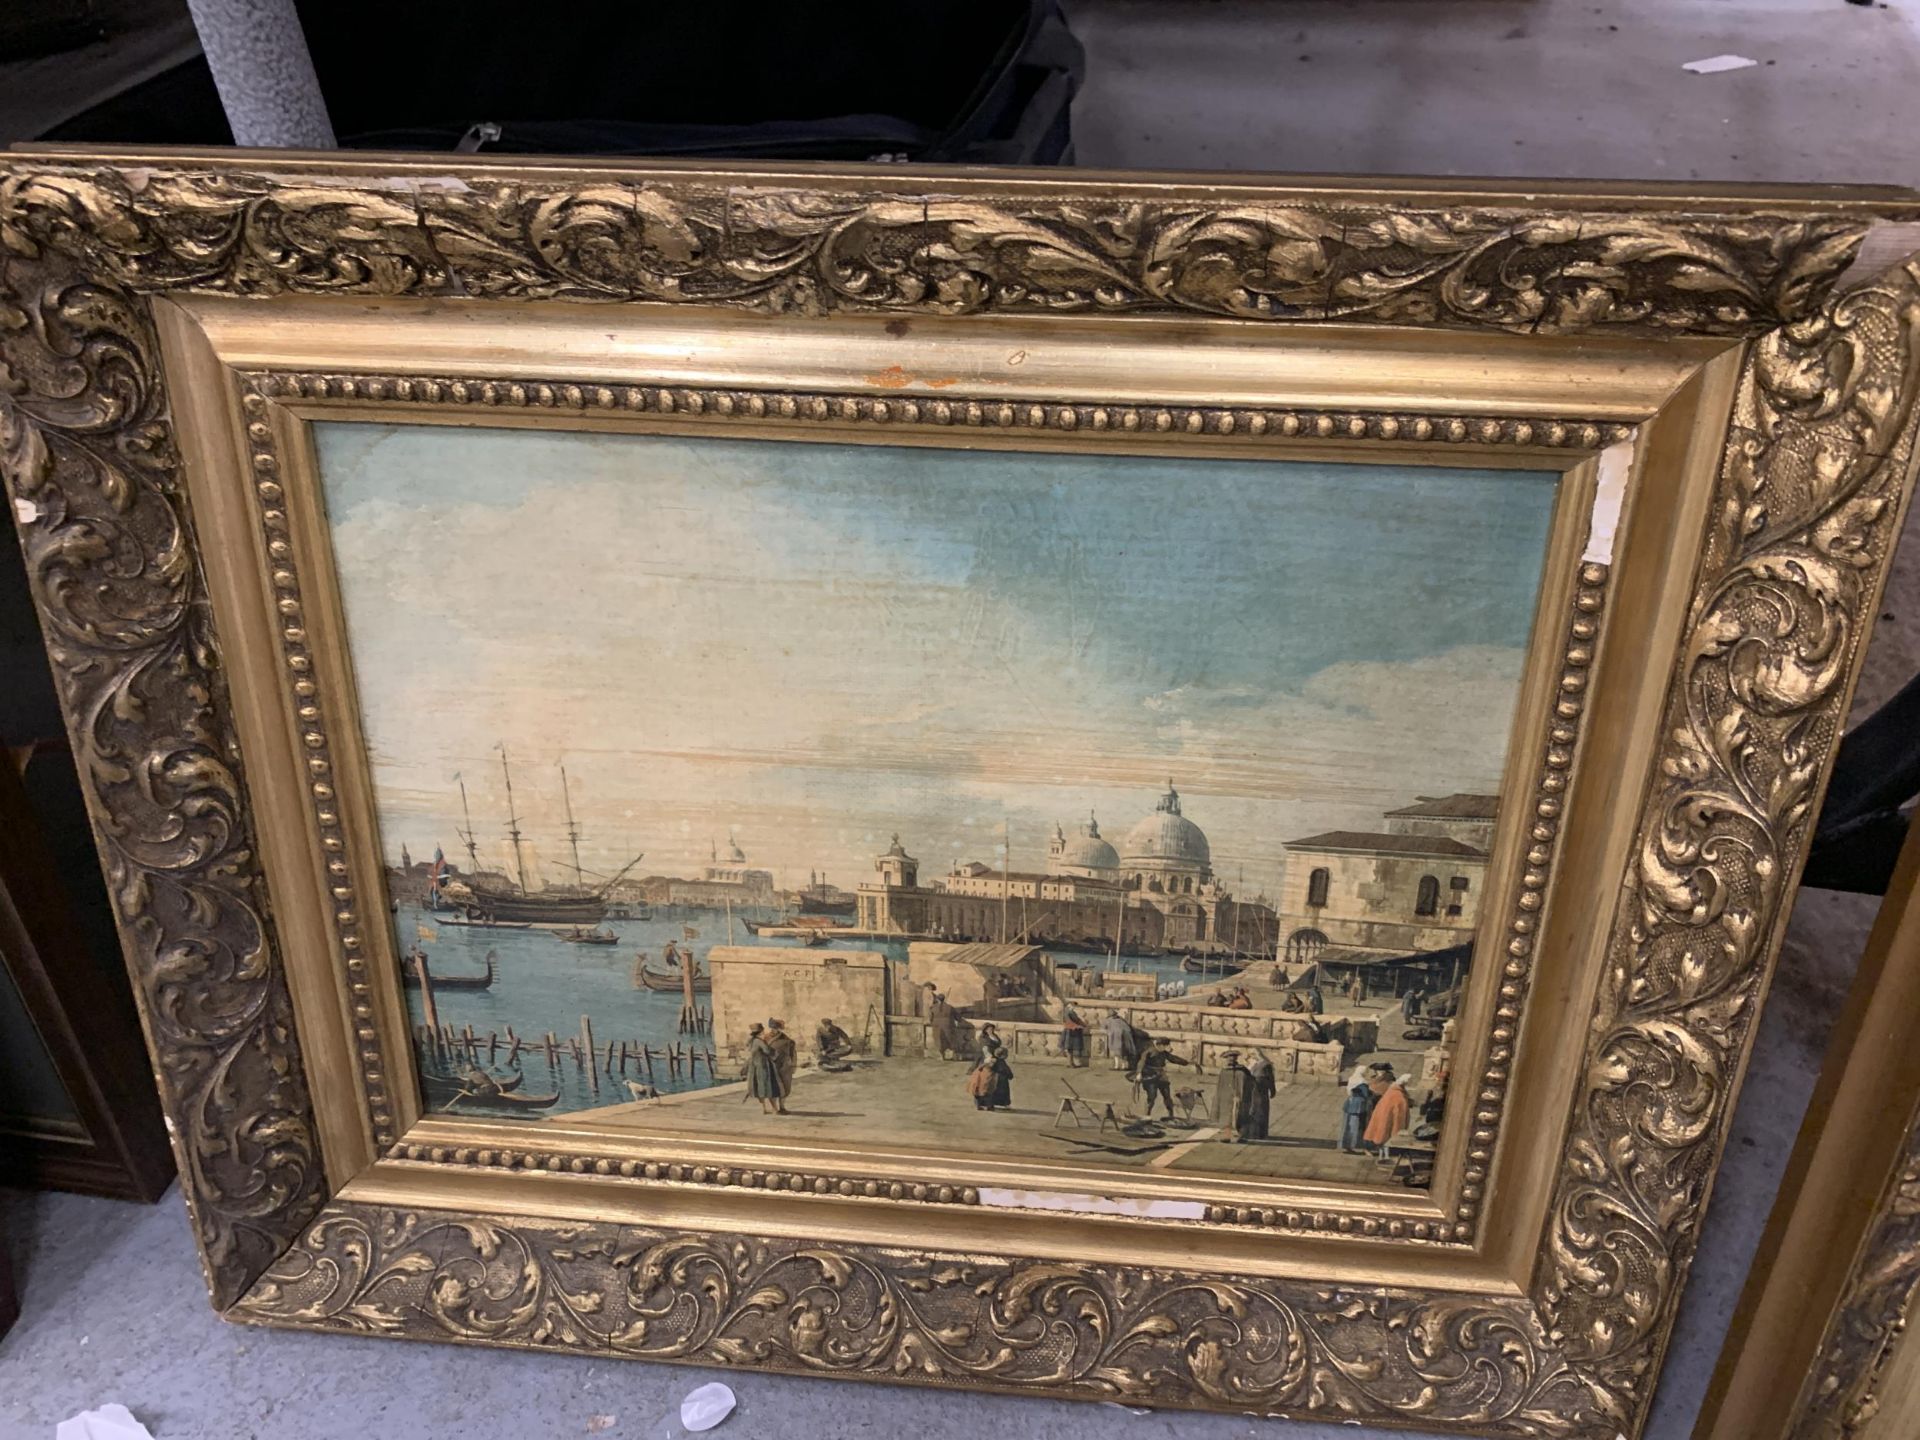 TWO OIL ON CANVAS OF ST MARKS SQUARE AND A VENETIAN HARBOUR, GILT FRAMED, 19" X 15" - Image 4 of 5